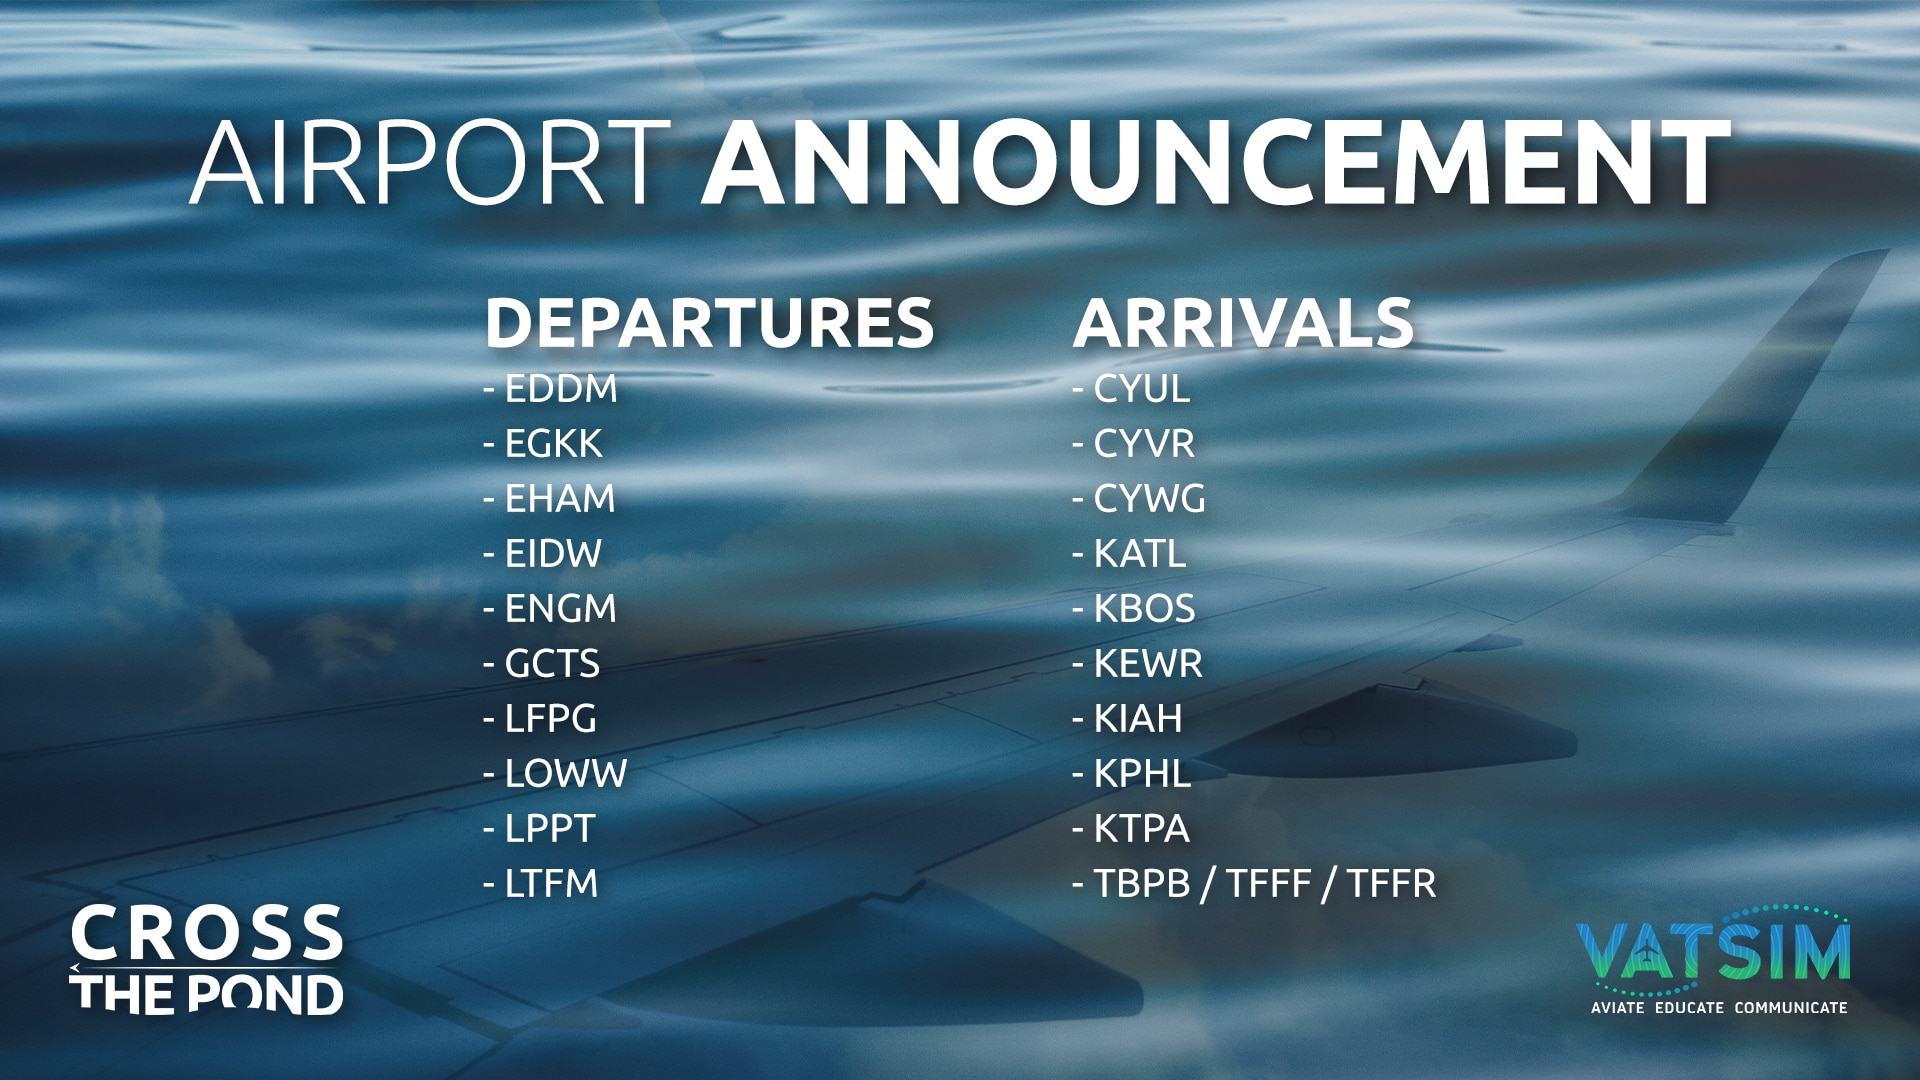 VATSIM Cross The Pond 2022 Airports revealed For the big event of